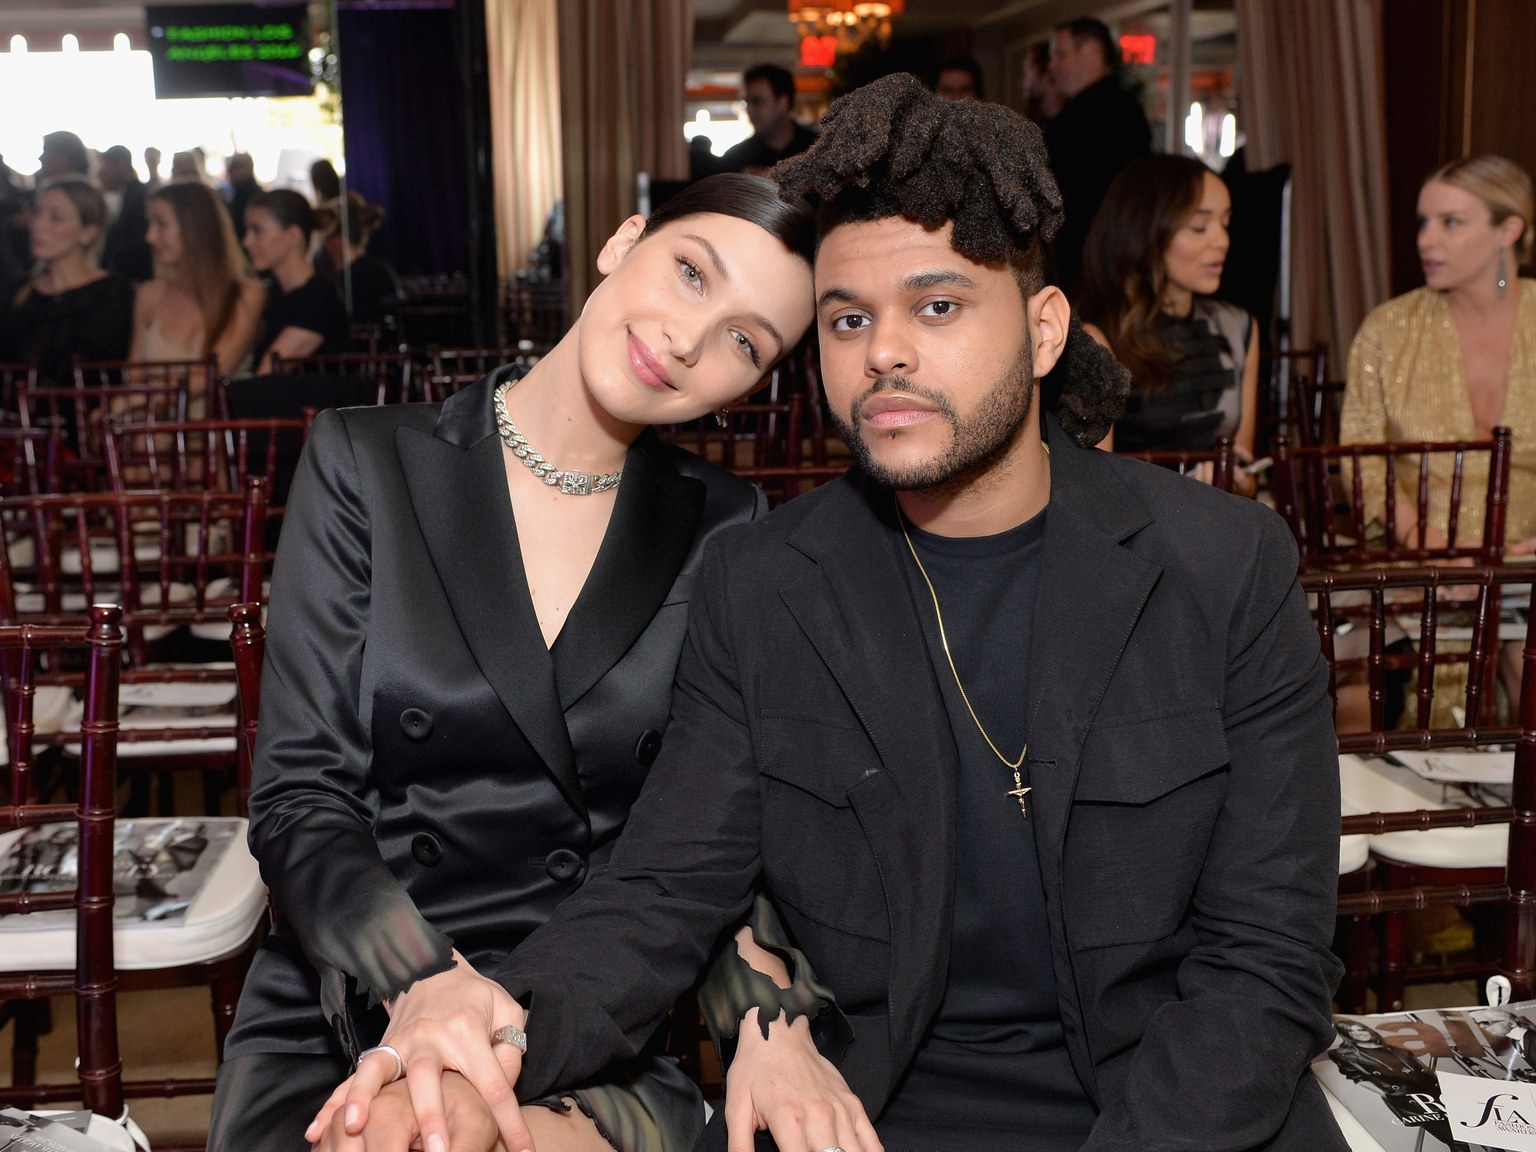 The love story Bella Hadid and The Weeknd